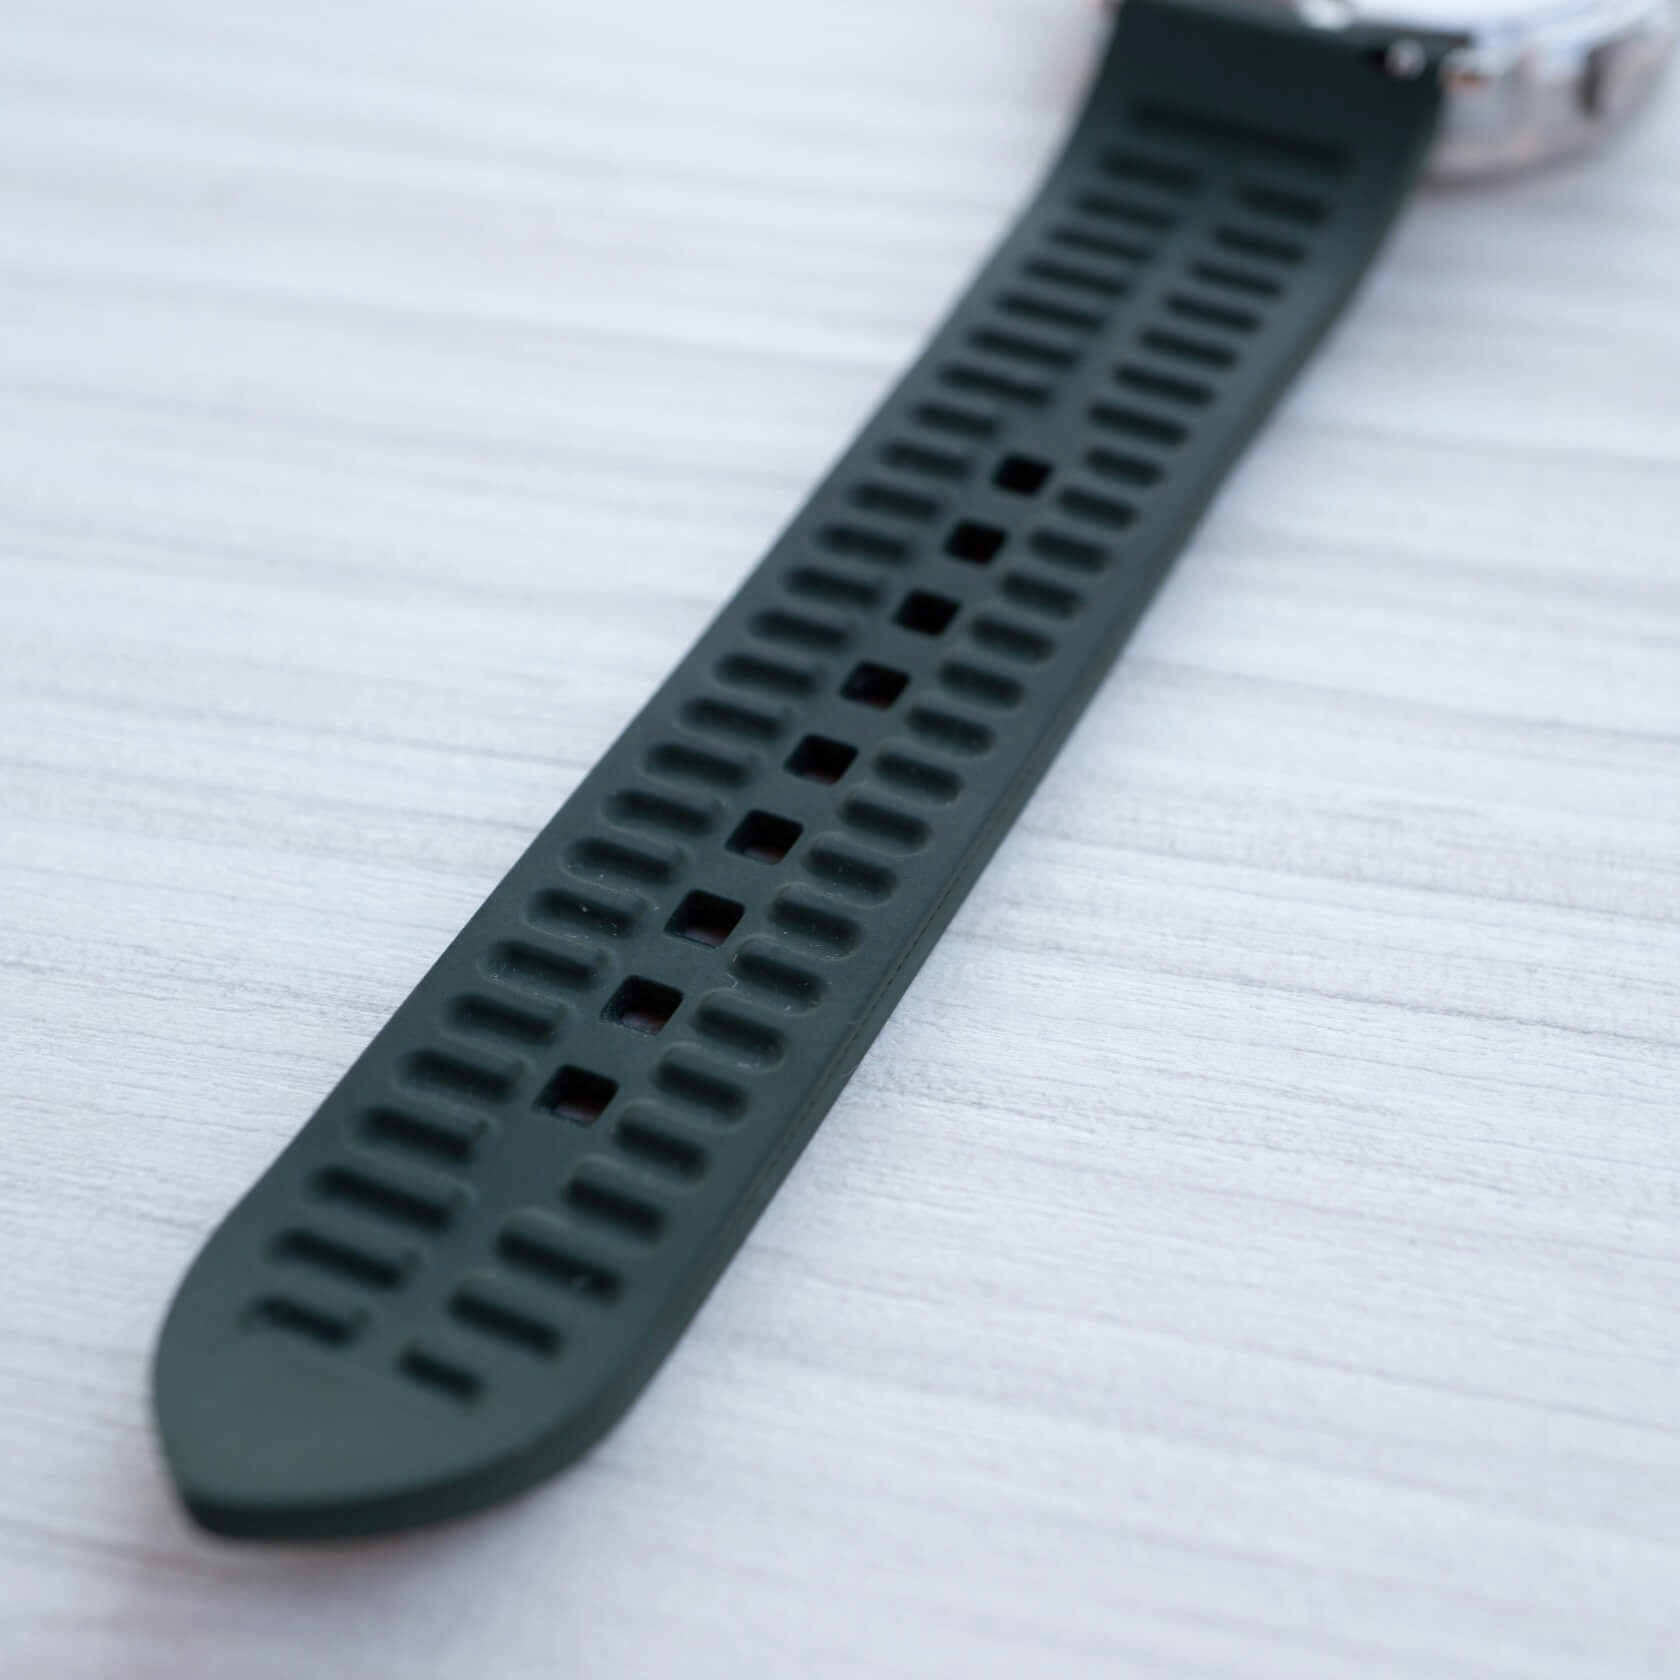 The underside of the strap has channels and ridges